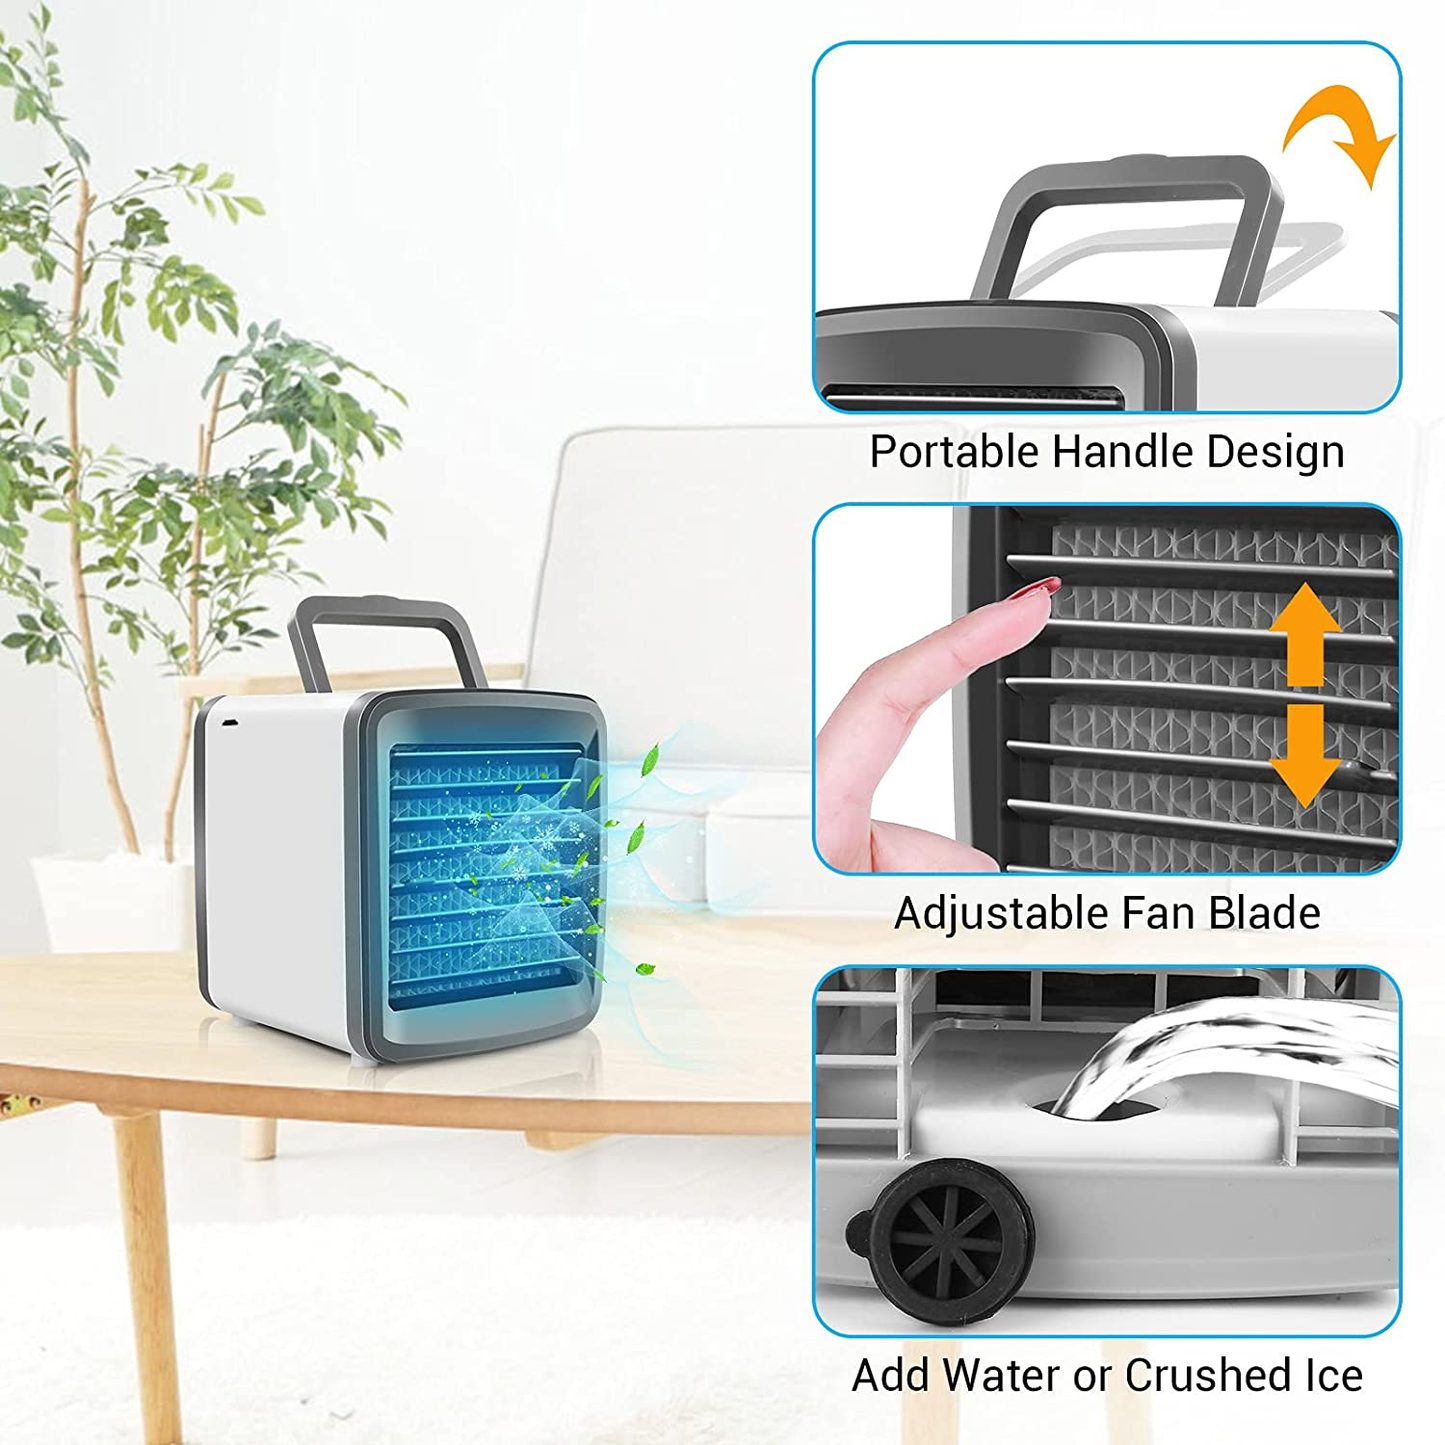 Personal Air Conditioner, Portable Air Cooler Fan with Handle, 4 in 1 Mini Evaporative Cooler USB Rechargeable Desk Fan, Cooling Mist Humidifier with Colorful Led Night Light for Room/Office/Dorm/Bedroom, Grey